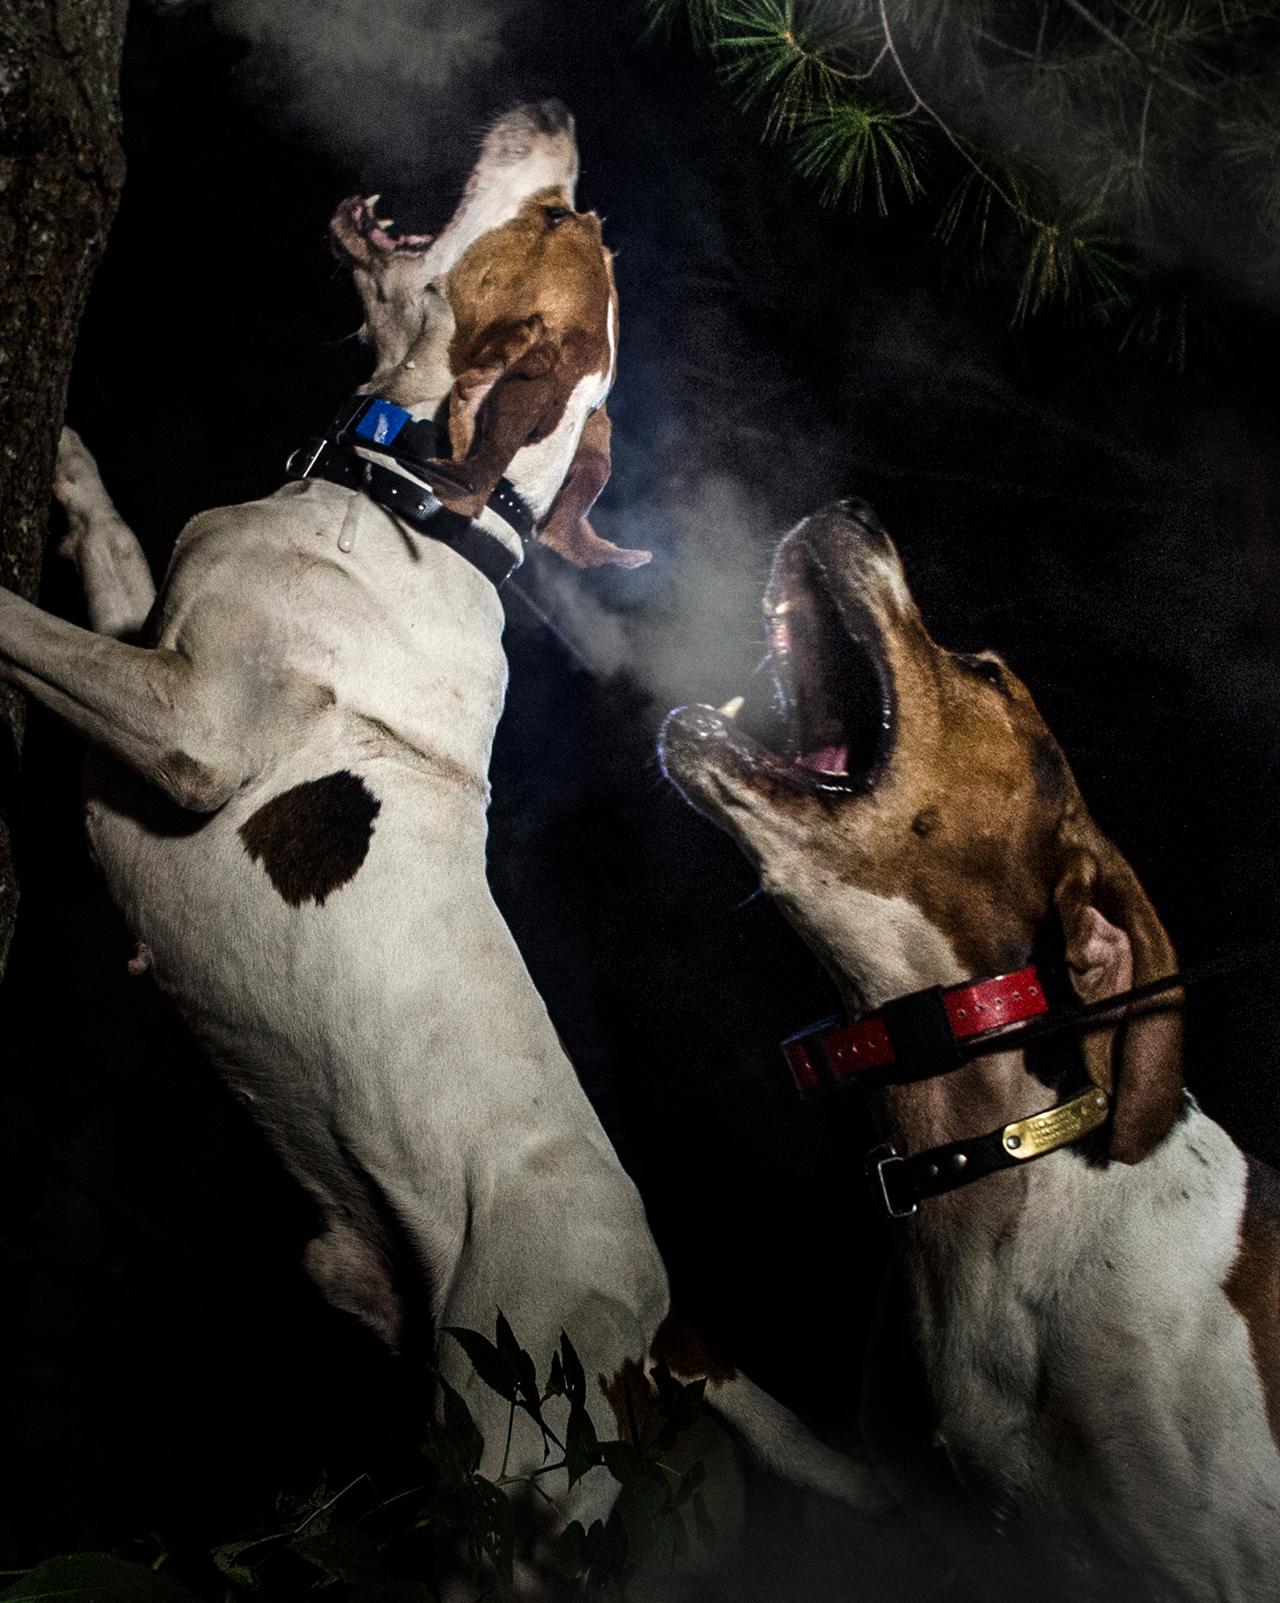 Two hunting hound dogs barking up a tree at night with handler following behind with a headlamp on.